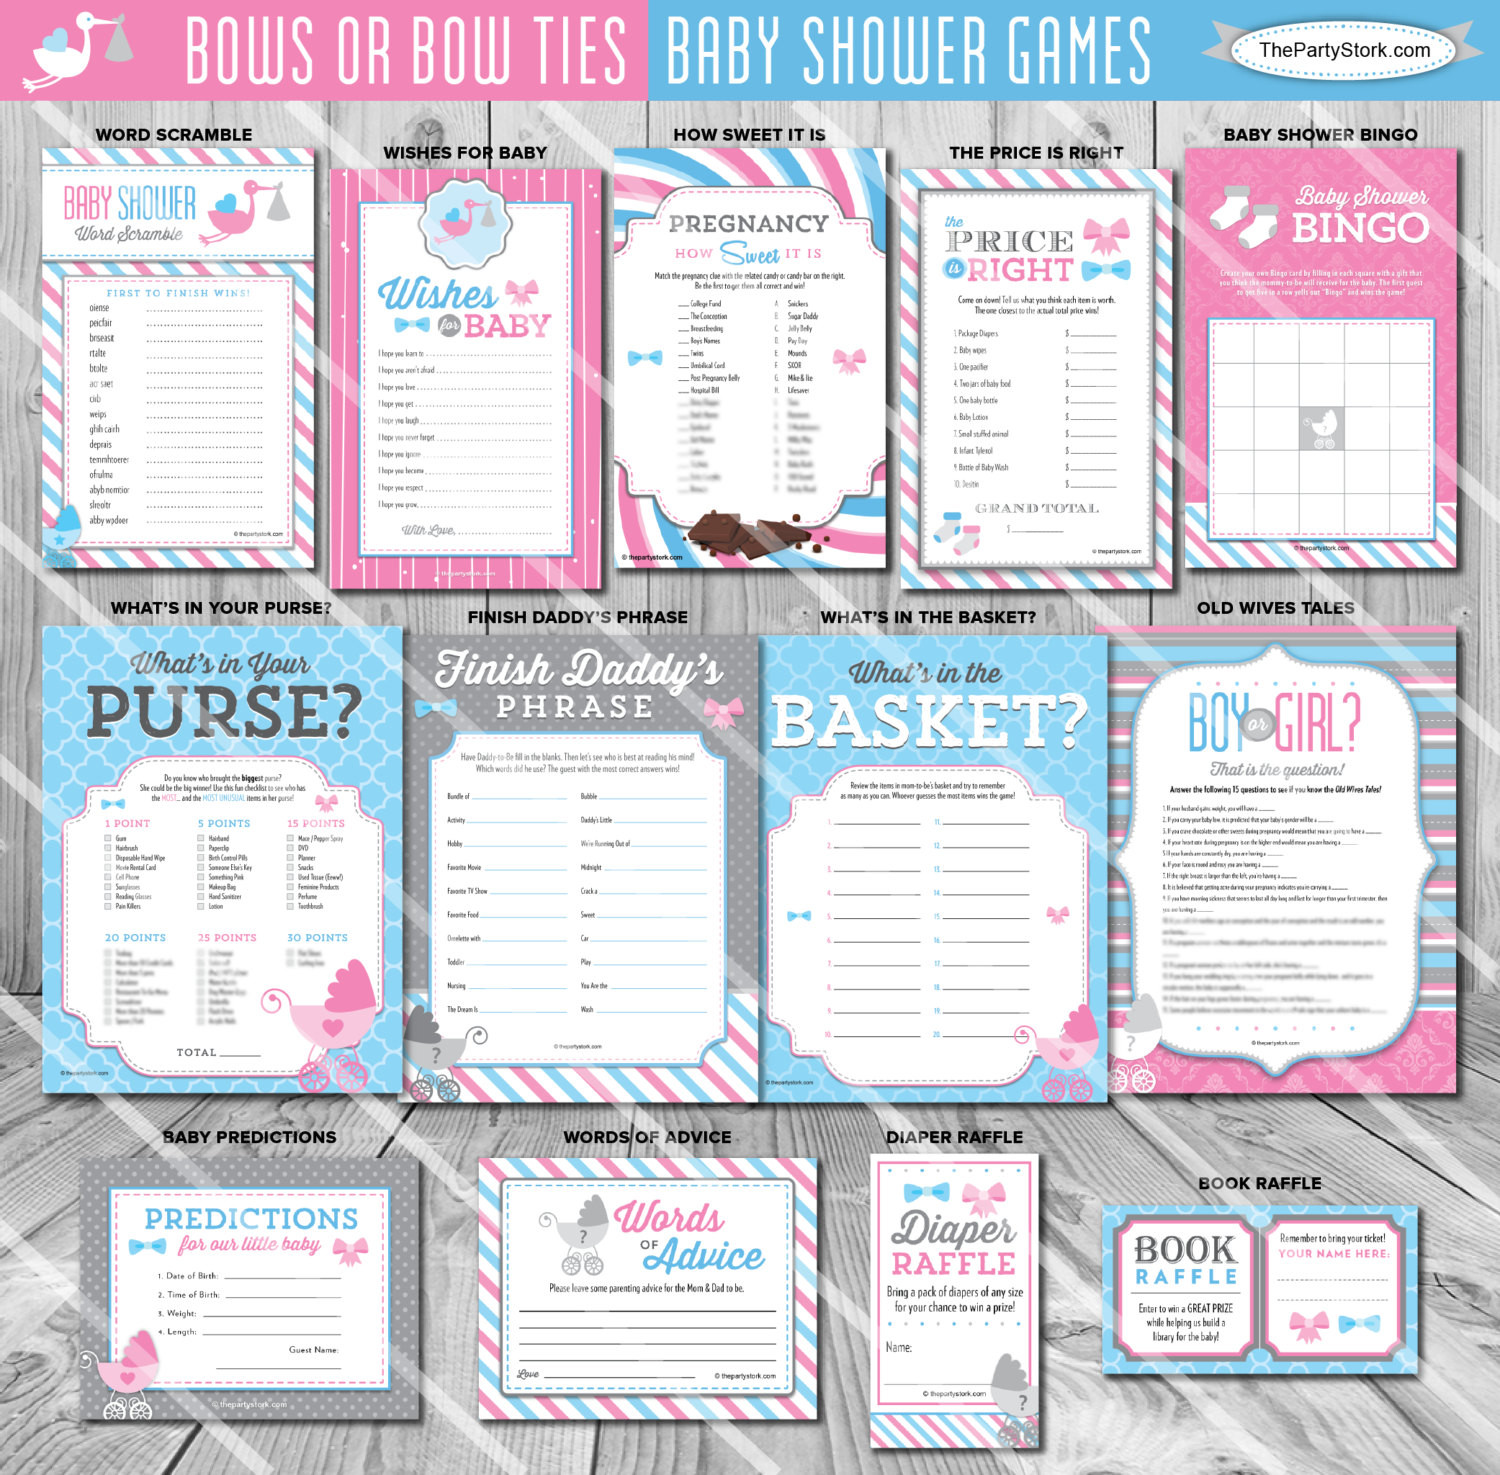 Gender Party Ideas Games
 Gender Reveal Party Games Bows or Bowties Baby Shower